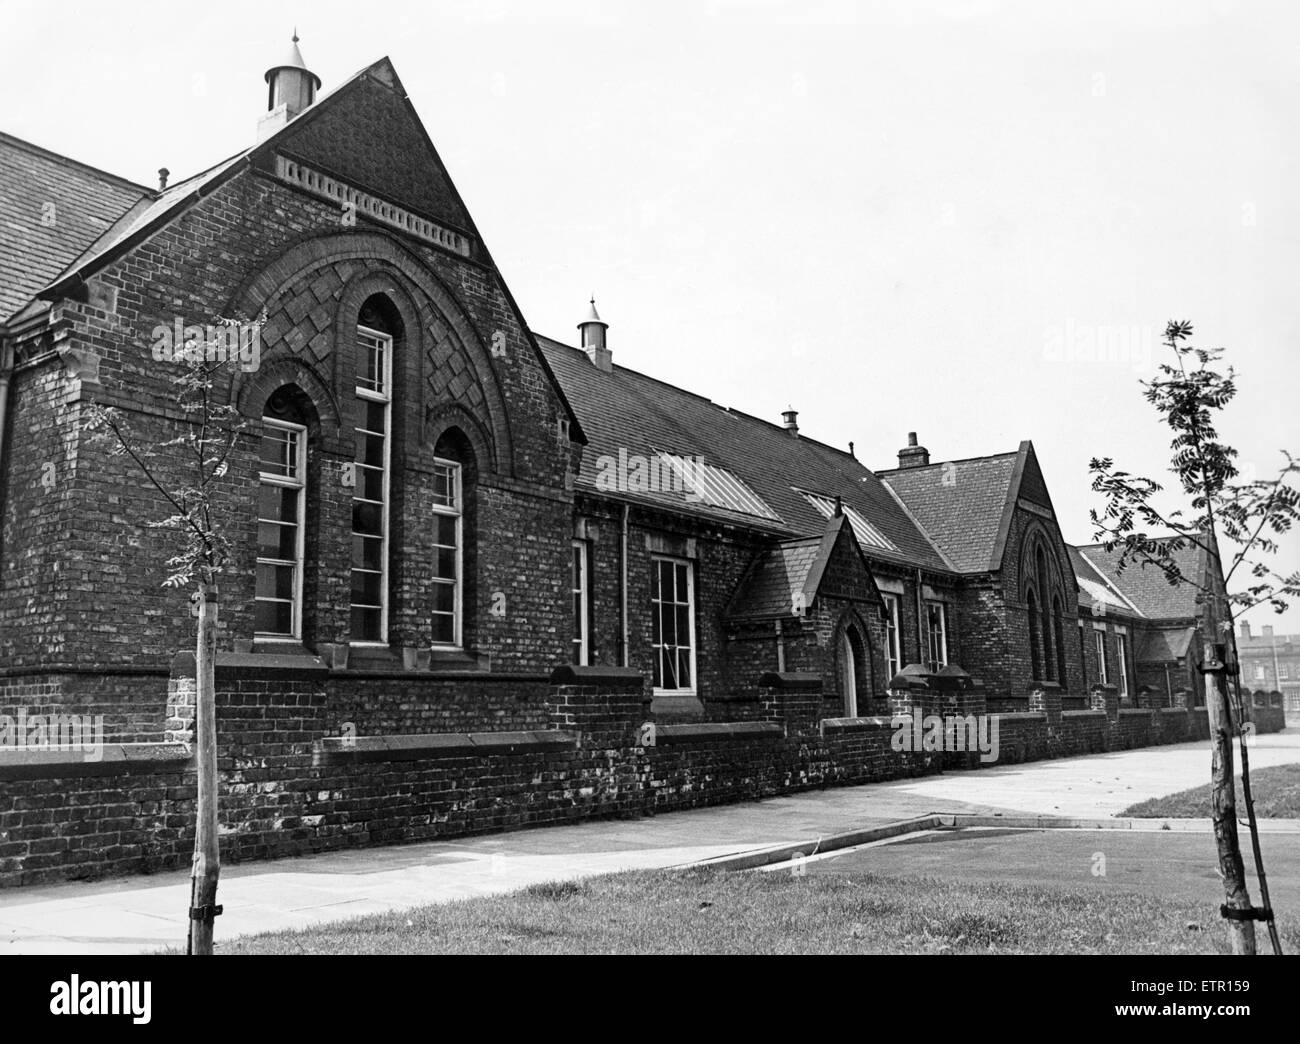 Thornaby Queen Street Scuola, Thornaby, Stockton on Tees, North Yorkshire. 13 luglio 1978. Foto Stock